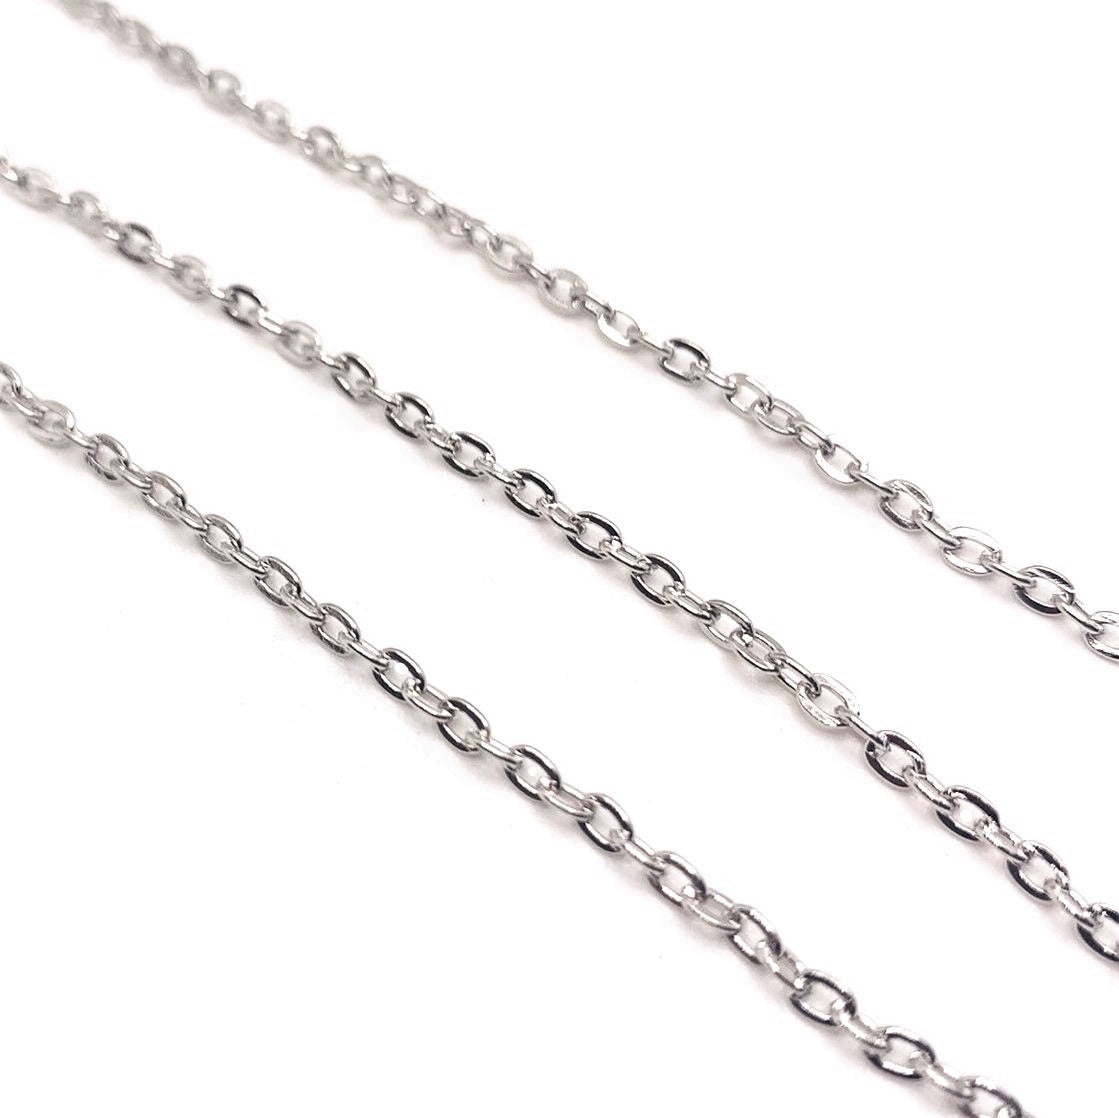 10 Meters Antique Silver Bulk Chain 2x3mm links